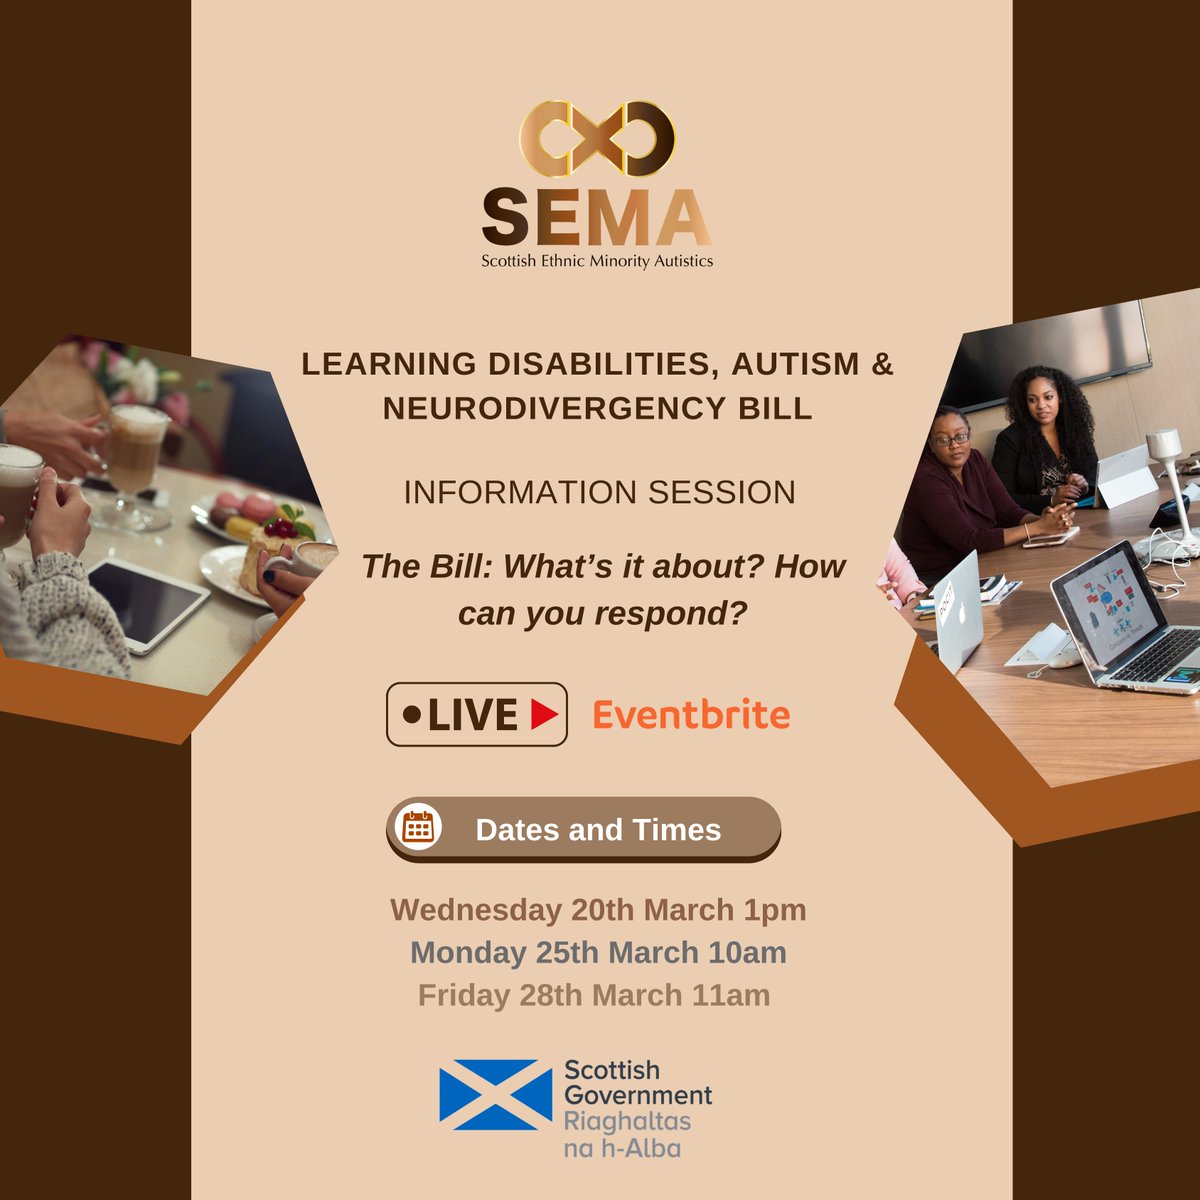 We are working with the #ScottishGovernment to reach out to racial minority groups to raise awareness of the public consultation which is due to end on April 21. Register for our online information session here: eventbrite.co.uk/o/scottish-eth… #ldanbill #Scotland #ActuallyAutistic